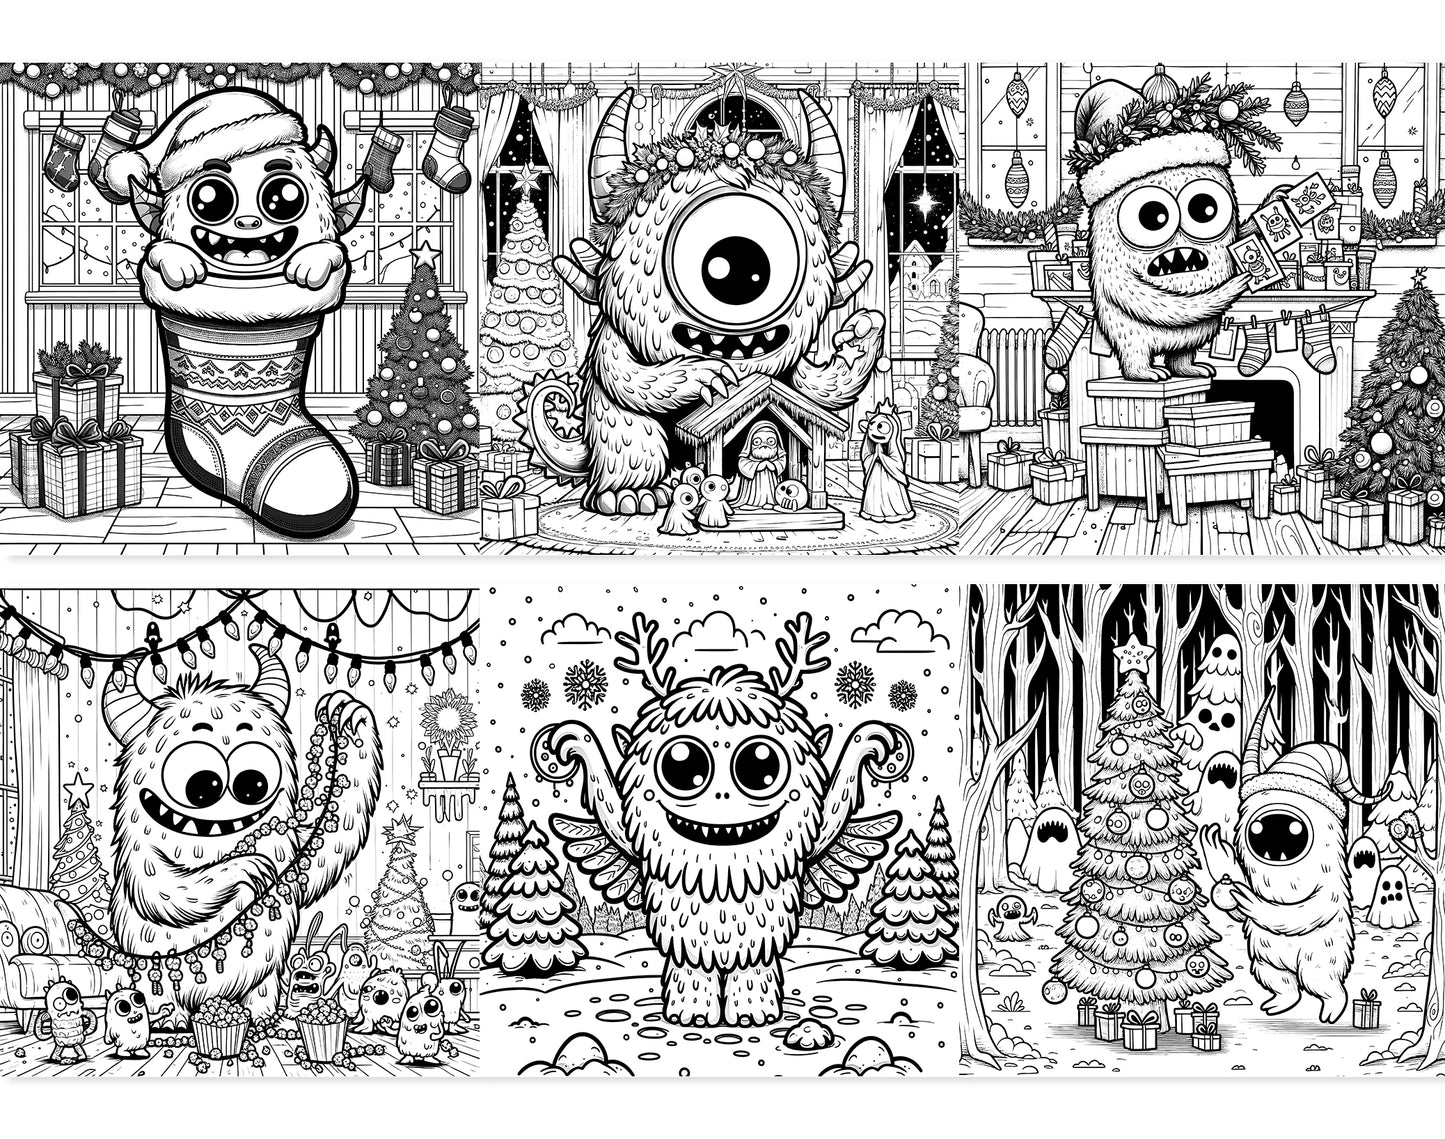 55 Adorable Creepy Christmas Monsters Coloring Pages - Instant Download - Printable PDF